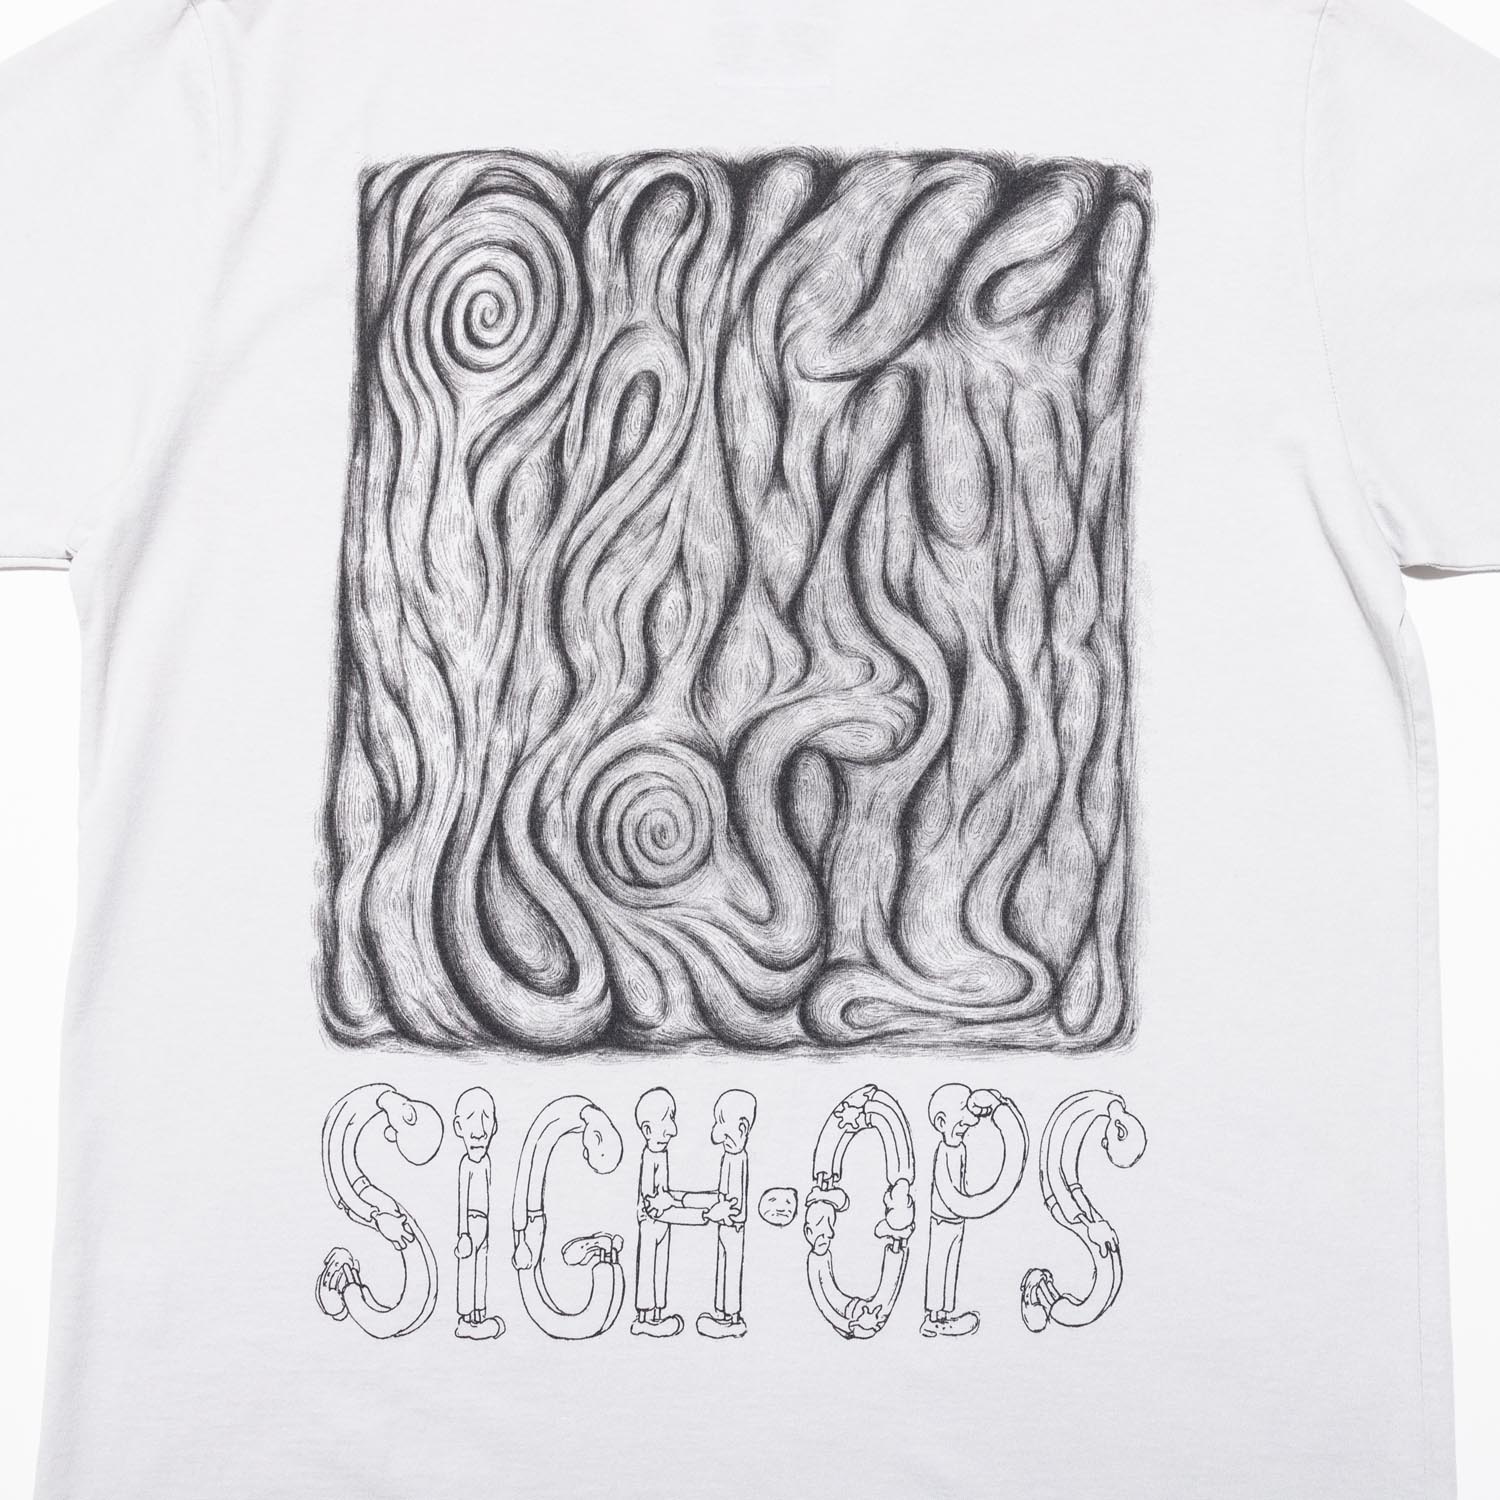 SIGHOPS Tee designed by Jeff Ladouceur